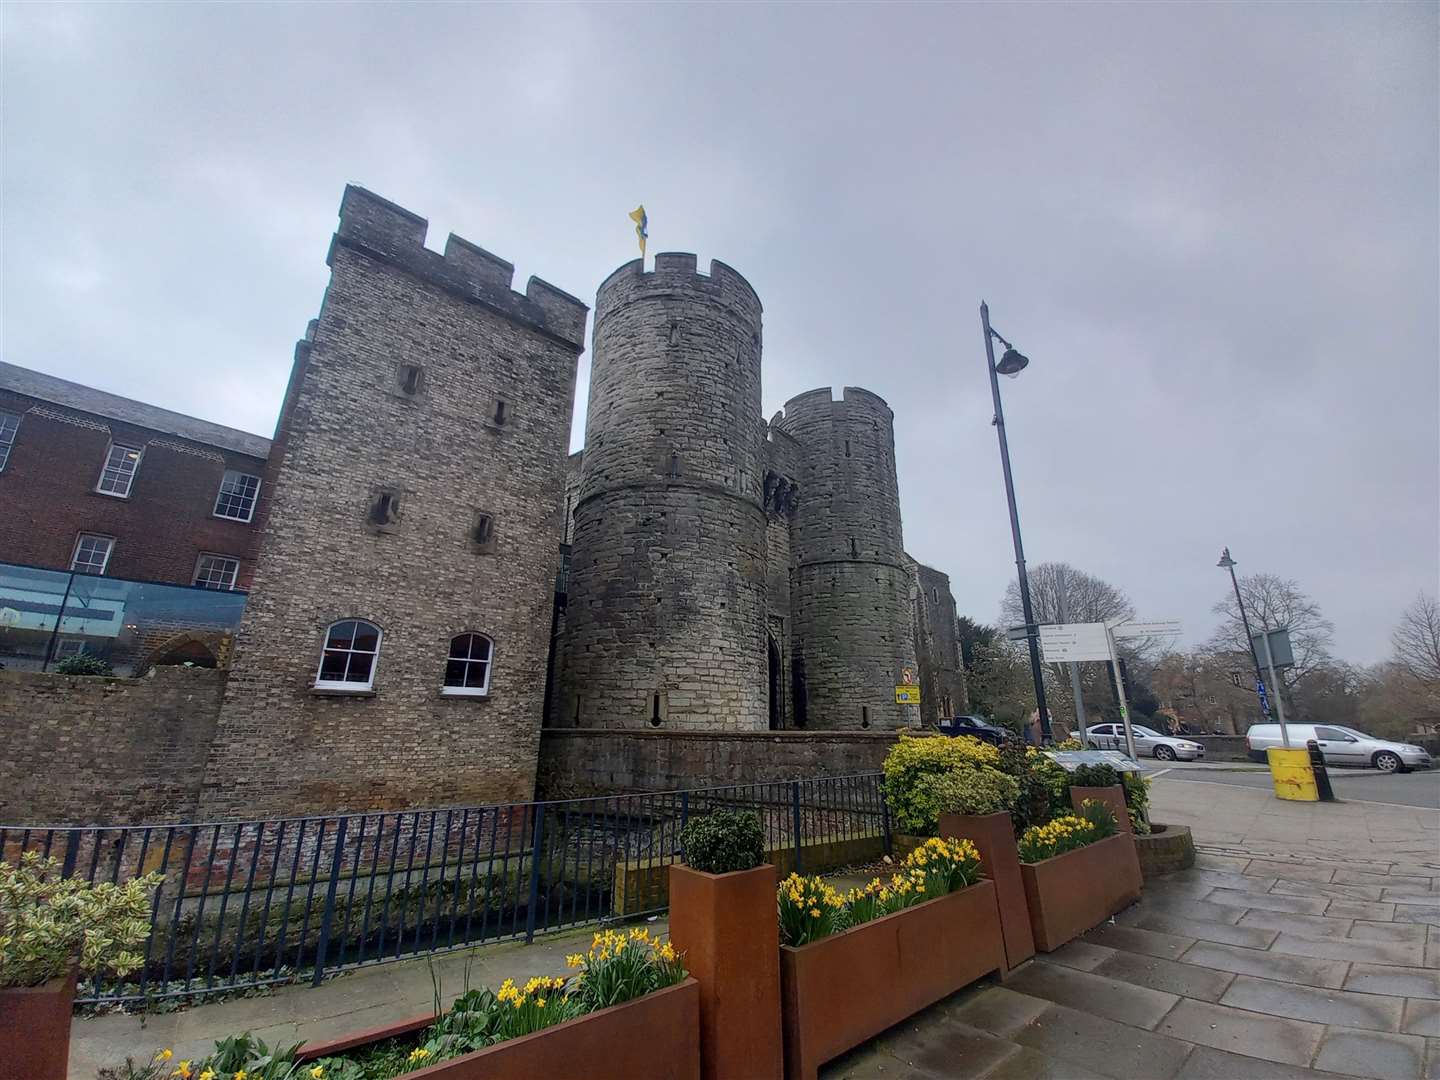 Stalls are planned for the area around Westgate Towers